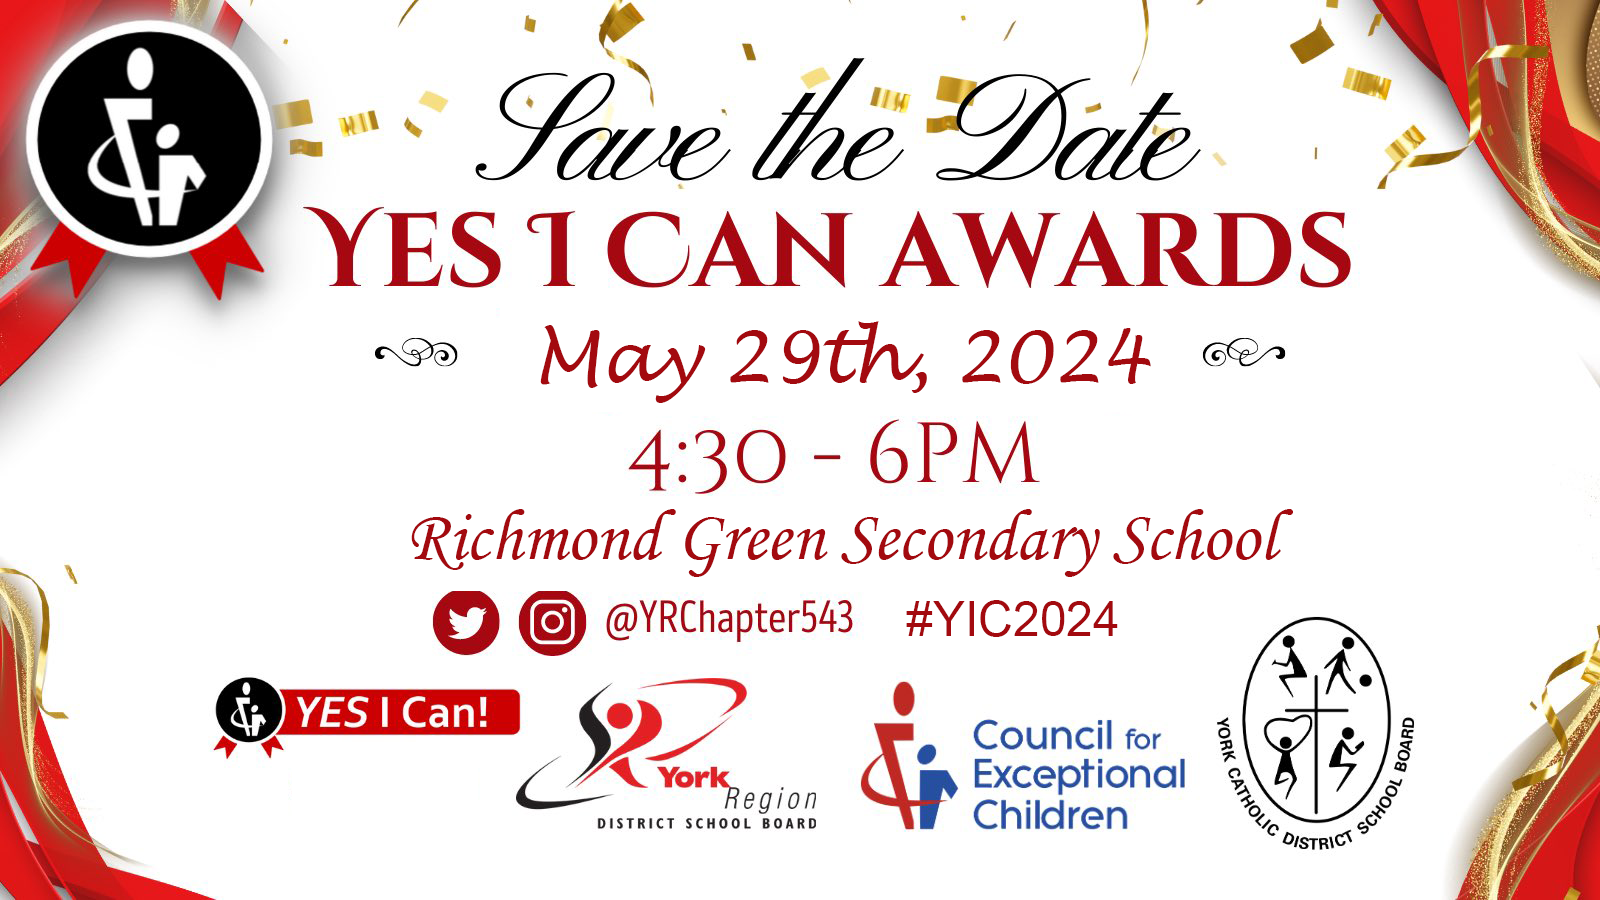 Yes I Can Awards Save the Date. May 29th, 2024. 4:30-6:00pm. Richmond Green Secondary School. X - @YRCHapter543. Instagram - #YIC2024.